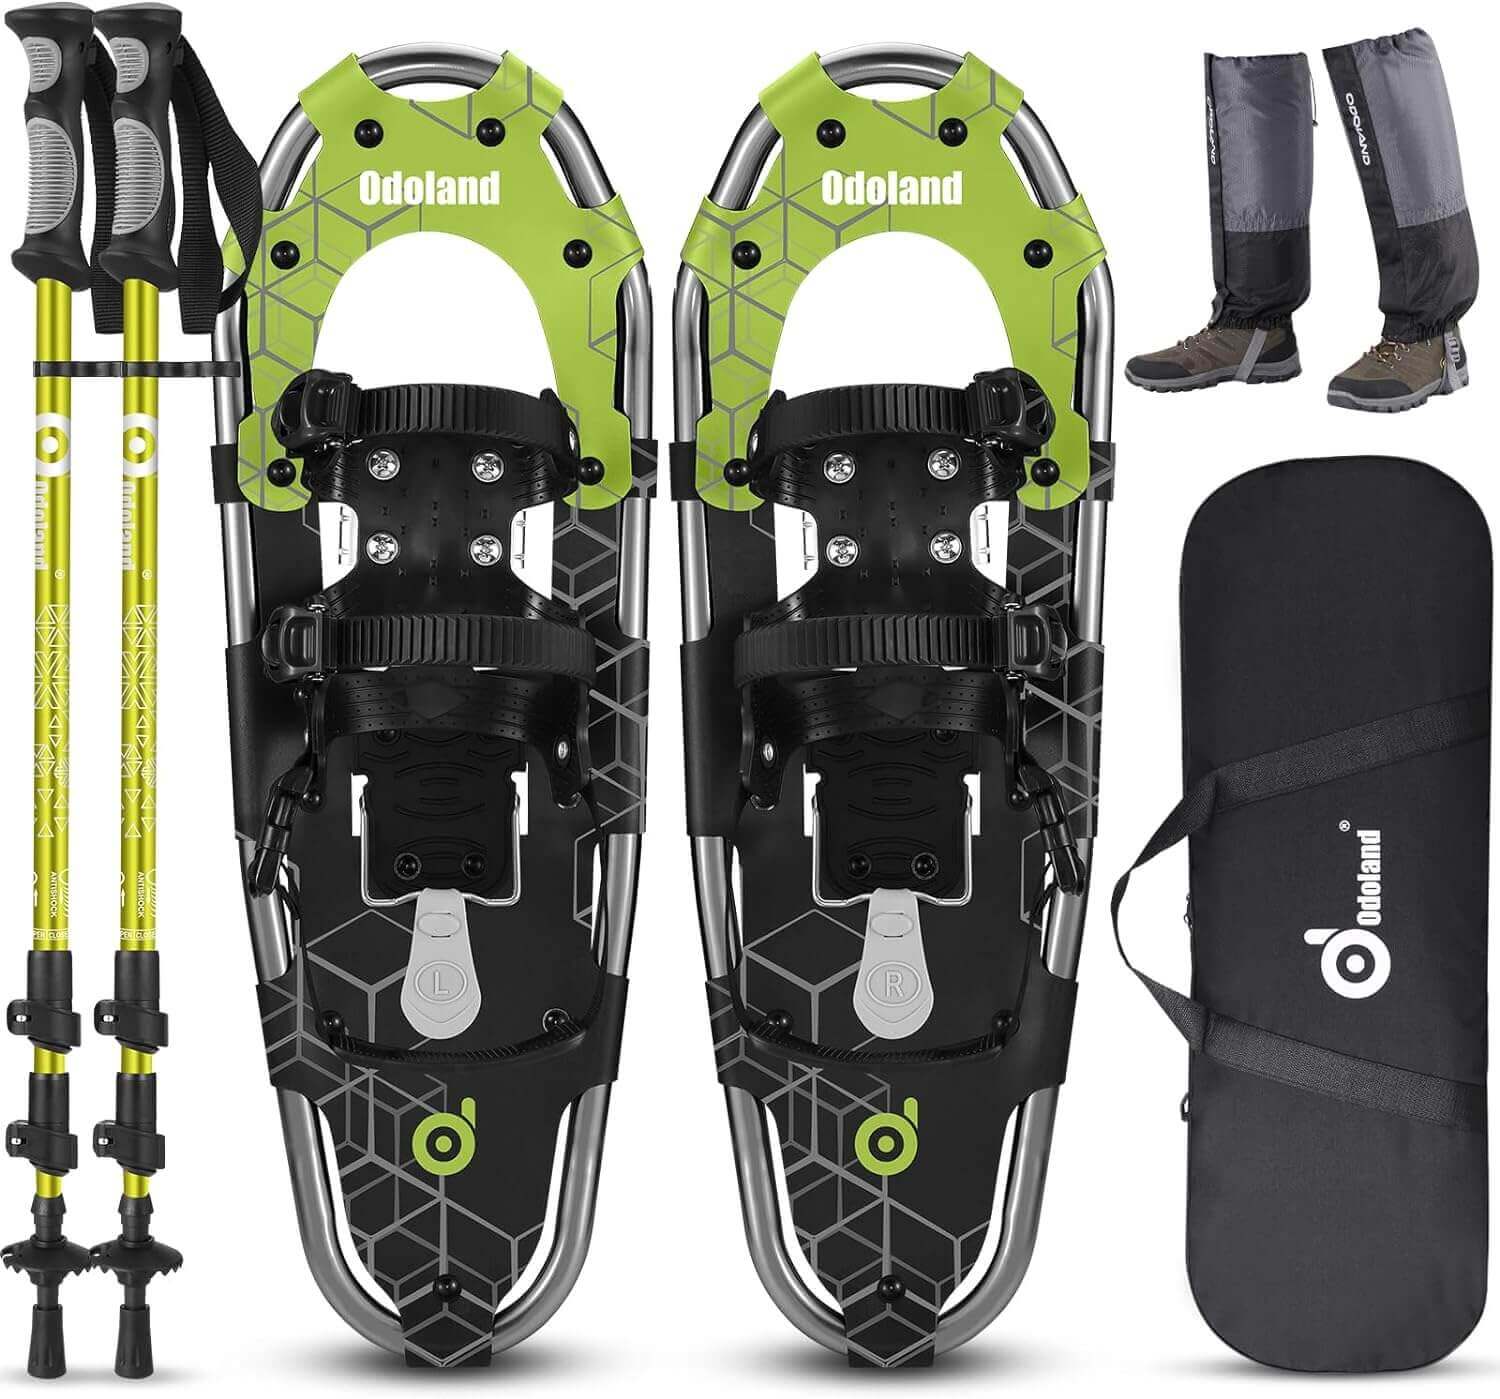 Shop The Latest >4-in-1 Snowshoes Set-Trekking Poles, Snow Leg Gaiters & Bag > *Only $125.54*> From The Top Brand > *Odolandl* > Shop Now and Get Free Shipping On Orders Over $45.00 >*Shop Earth Foot*